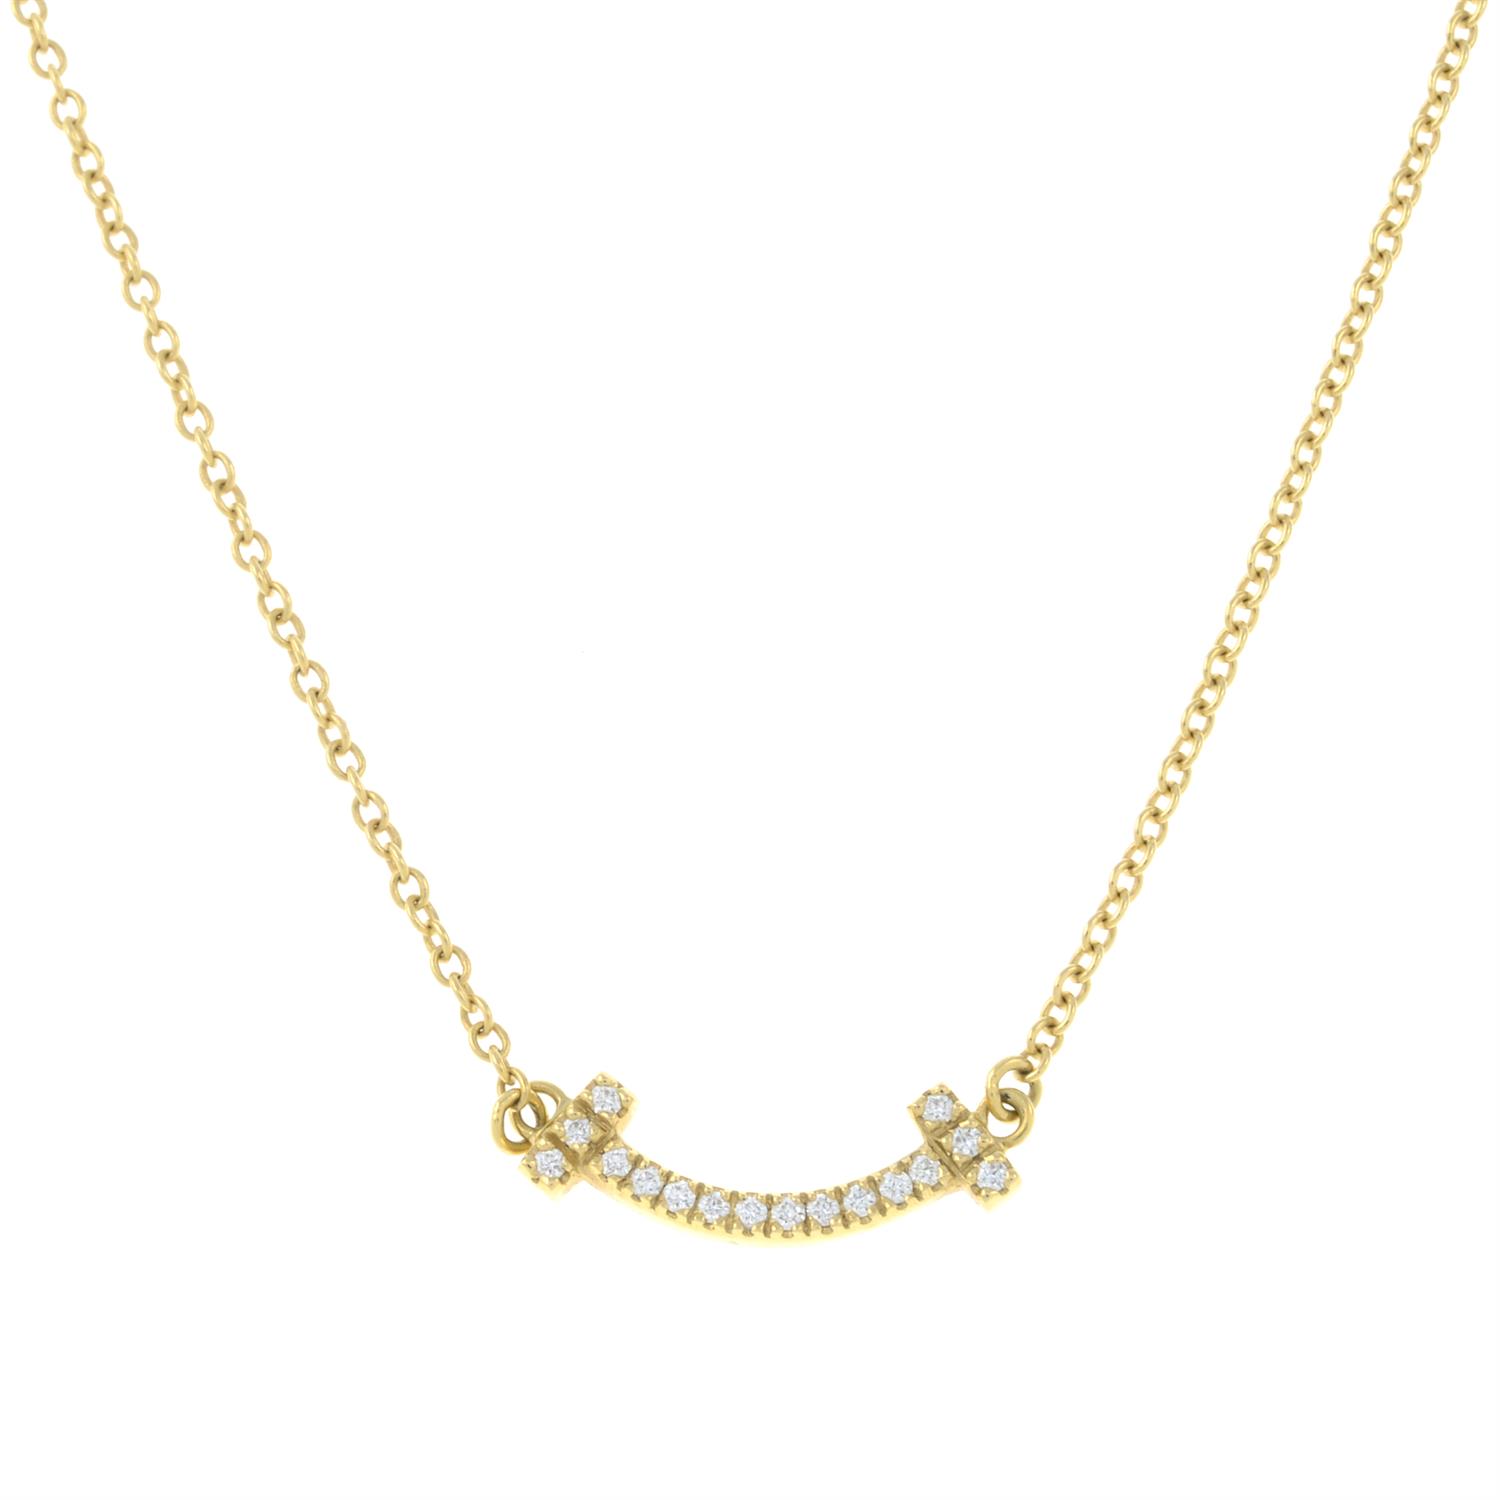 A pave-set diamond 'Tiffany T' Smile pendant, with chain, by Tiffany & Co.